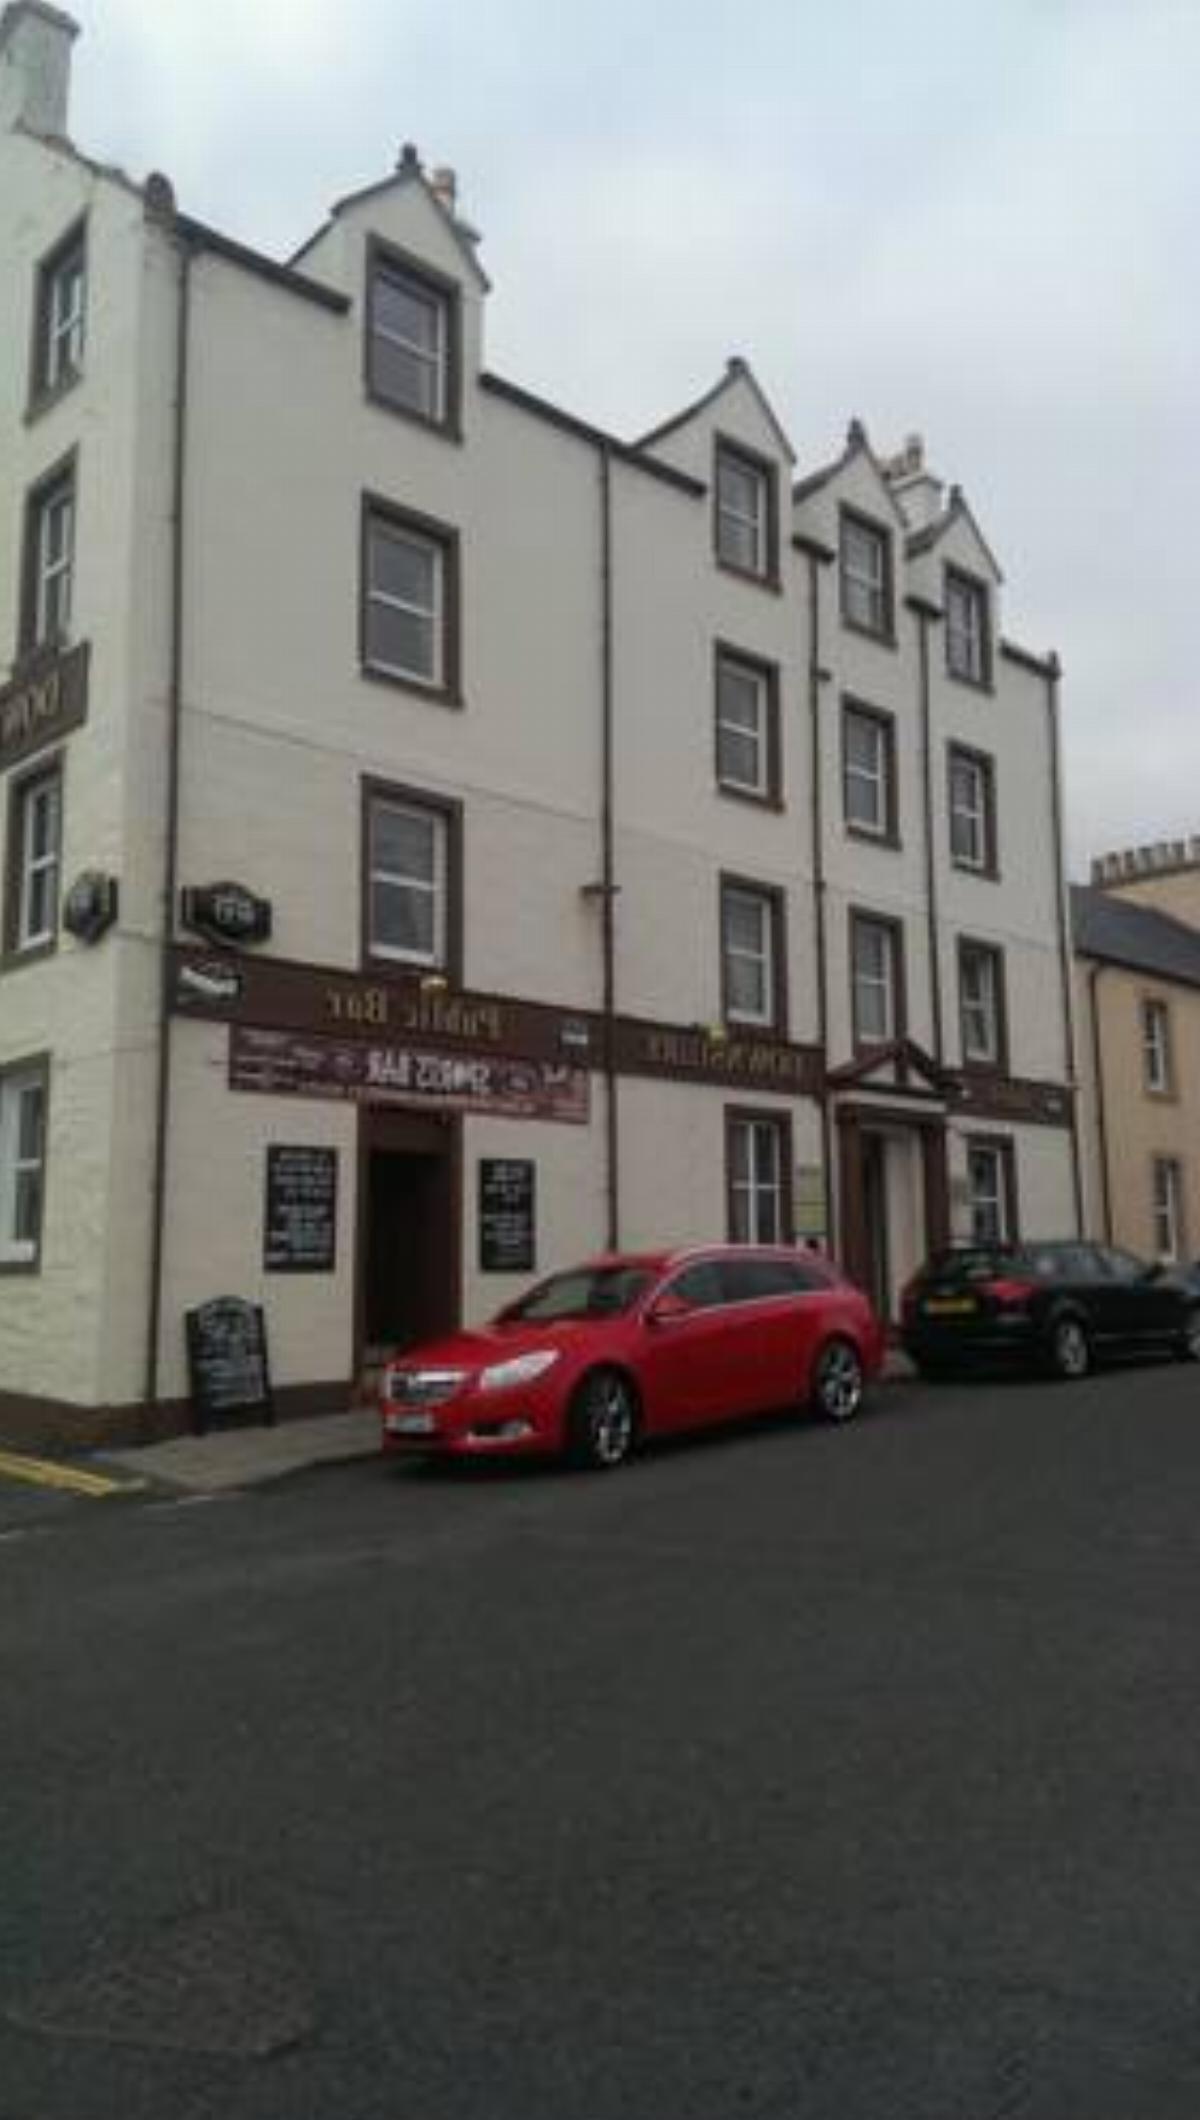 The Downshire Hotel